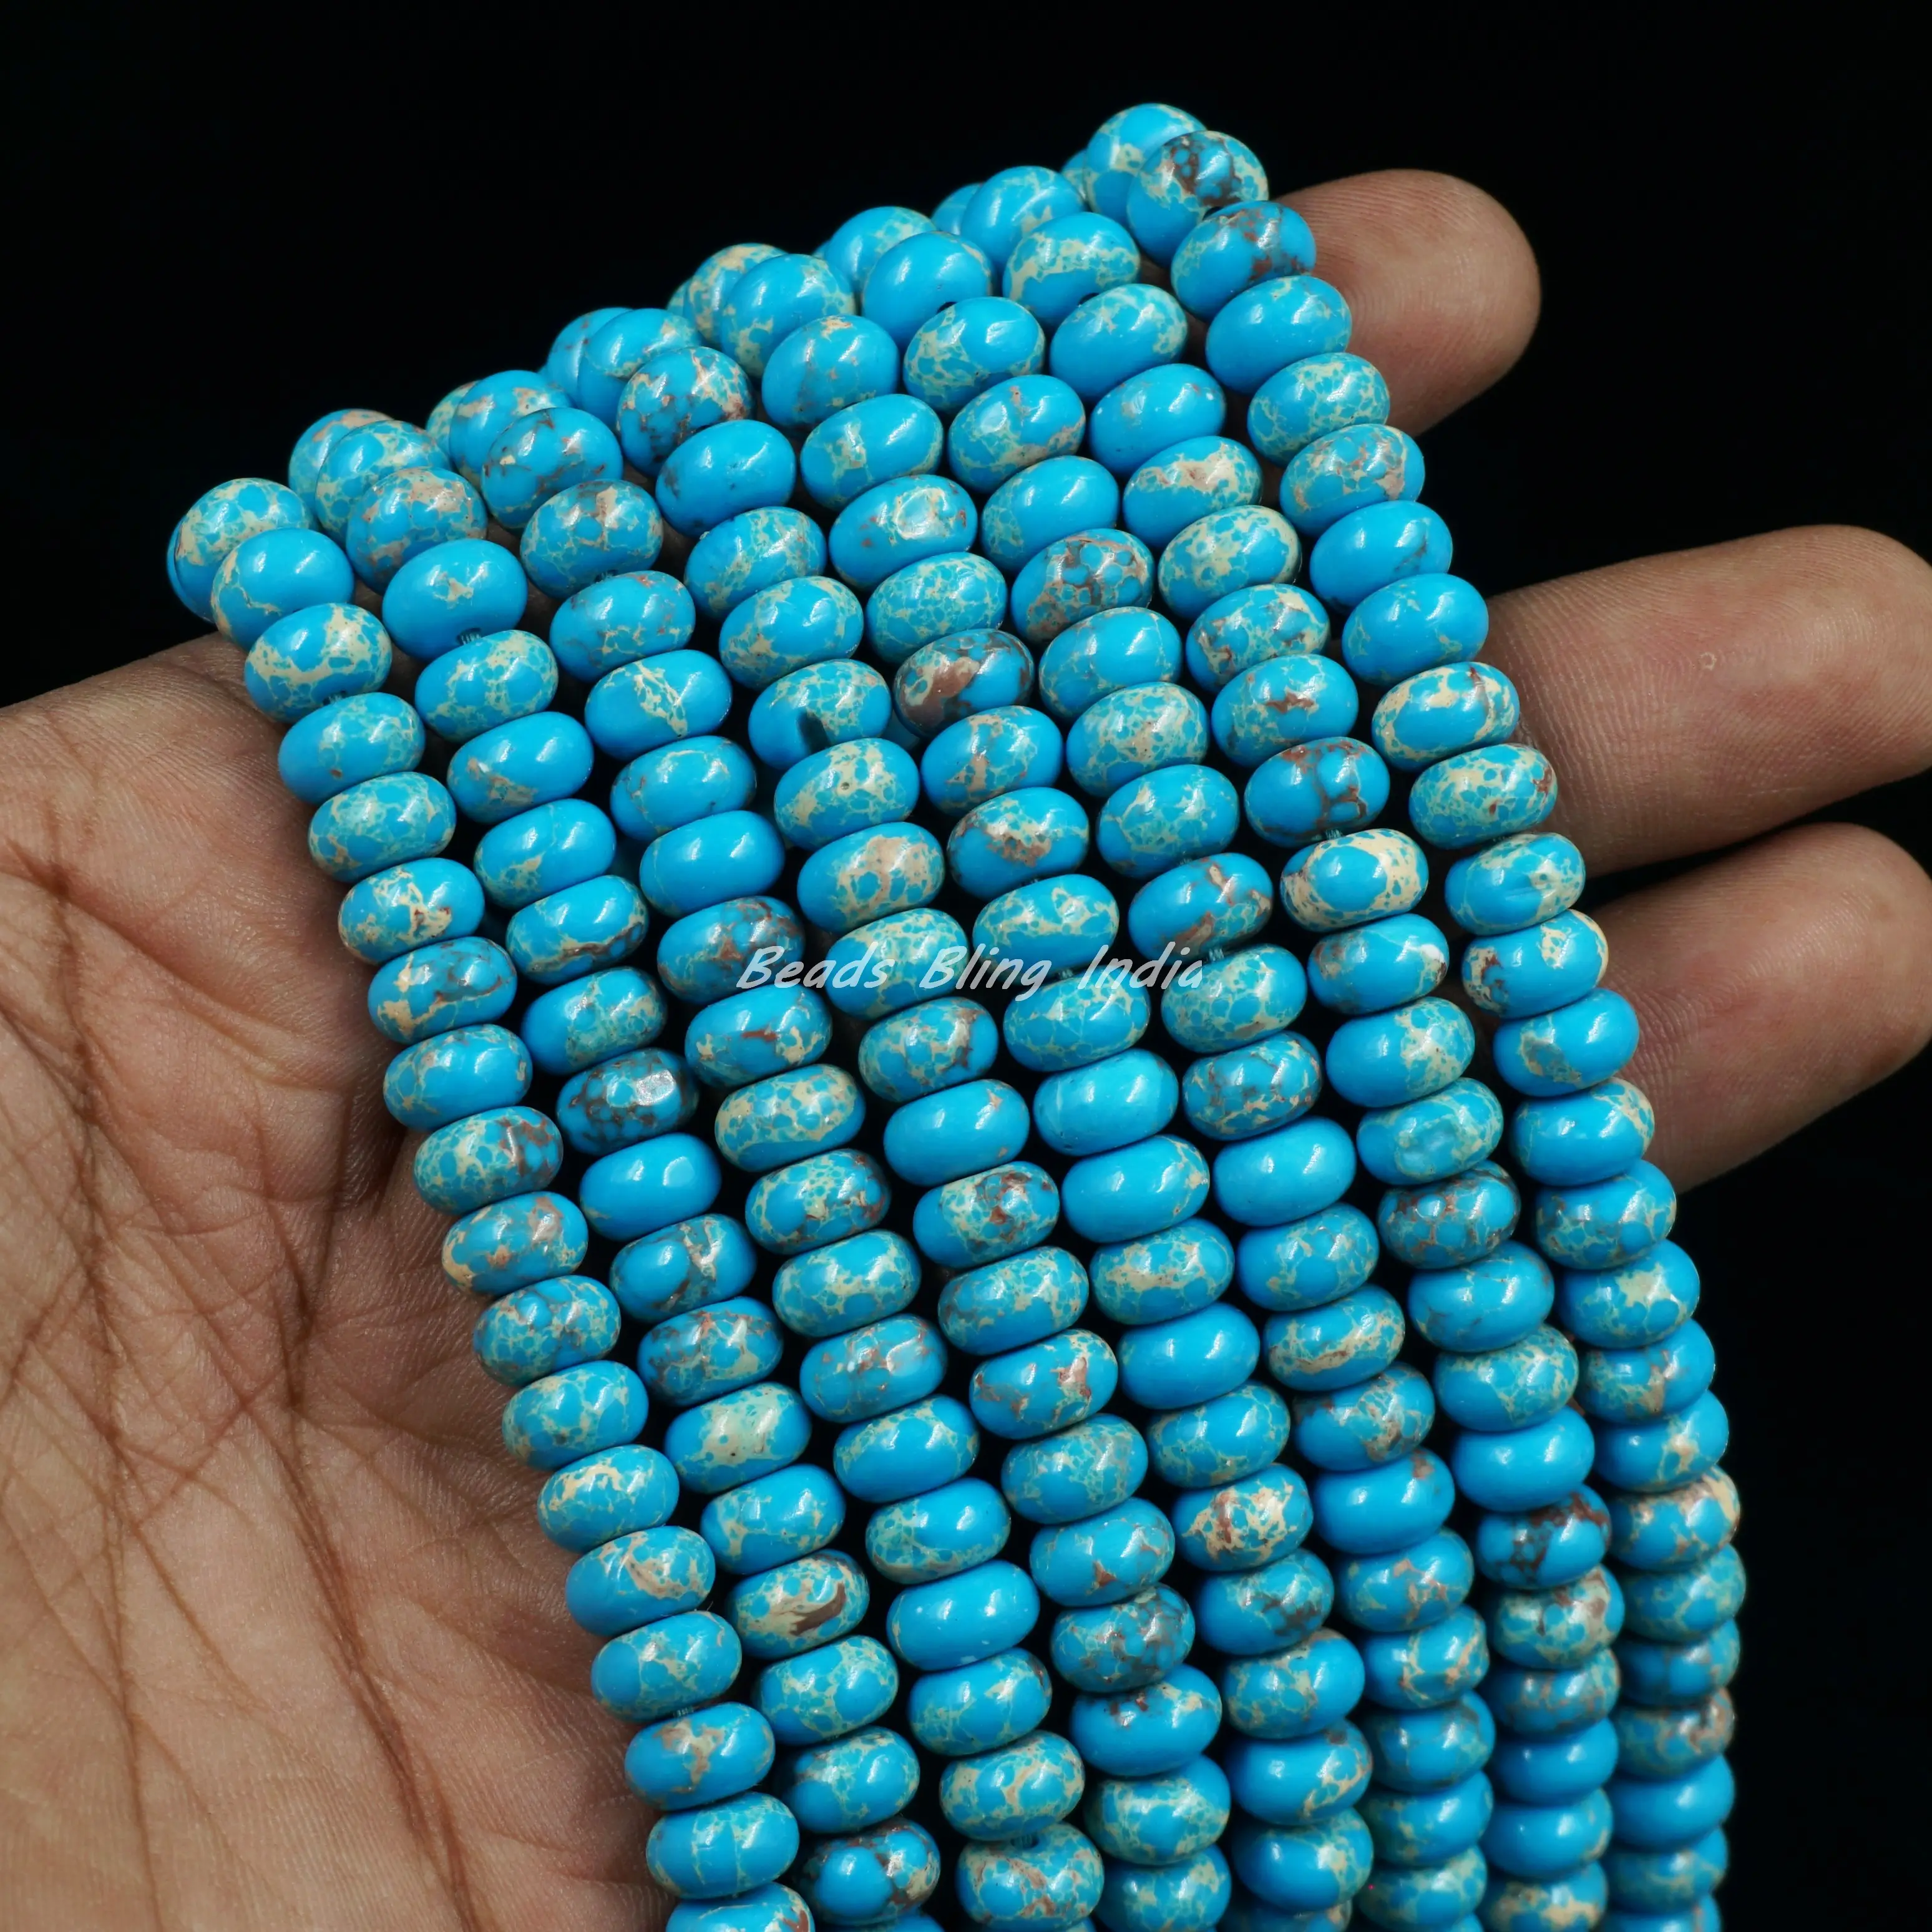 Best Selling Tibetan Turquoise Quartz Smooth Rondelle Shape Beads Natural Blue Turquoise Quartz Gemstone Beads For Jewelry Craft